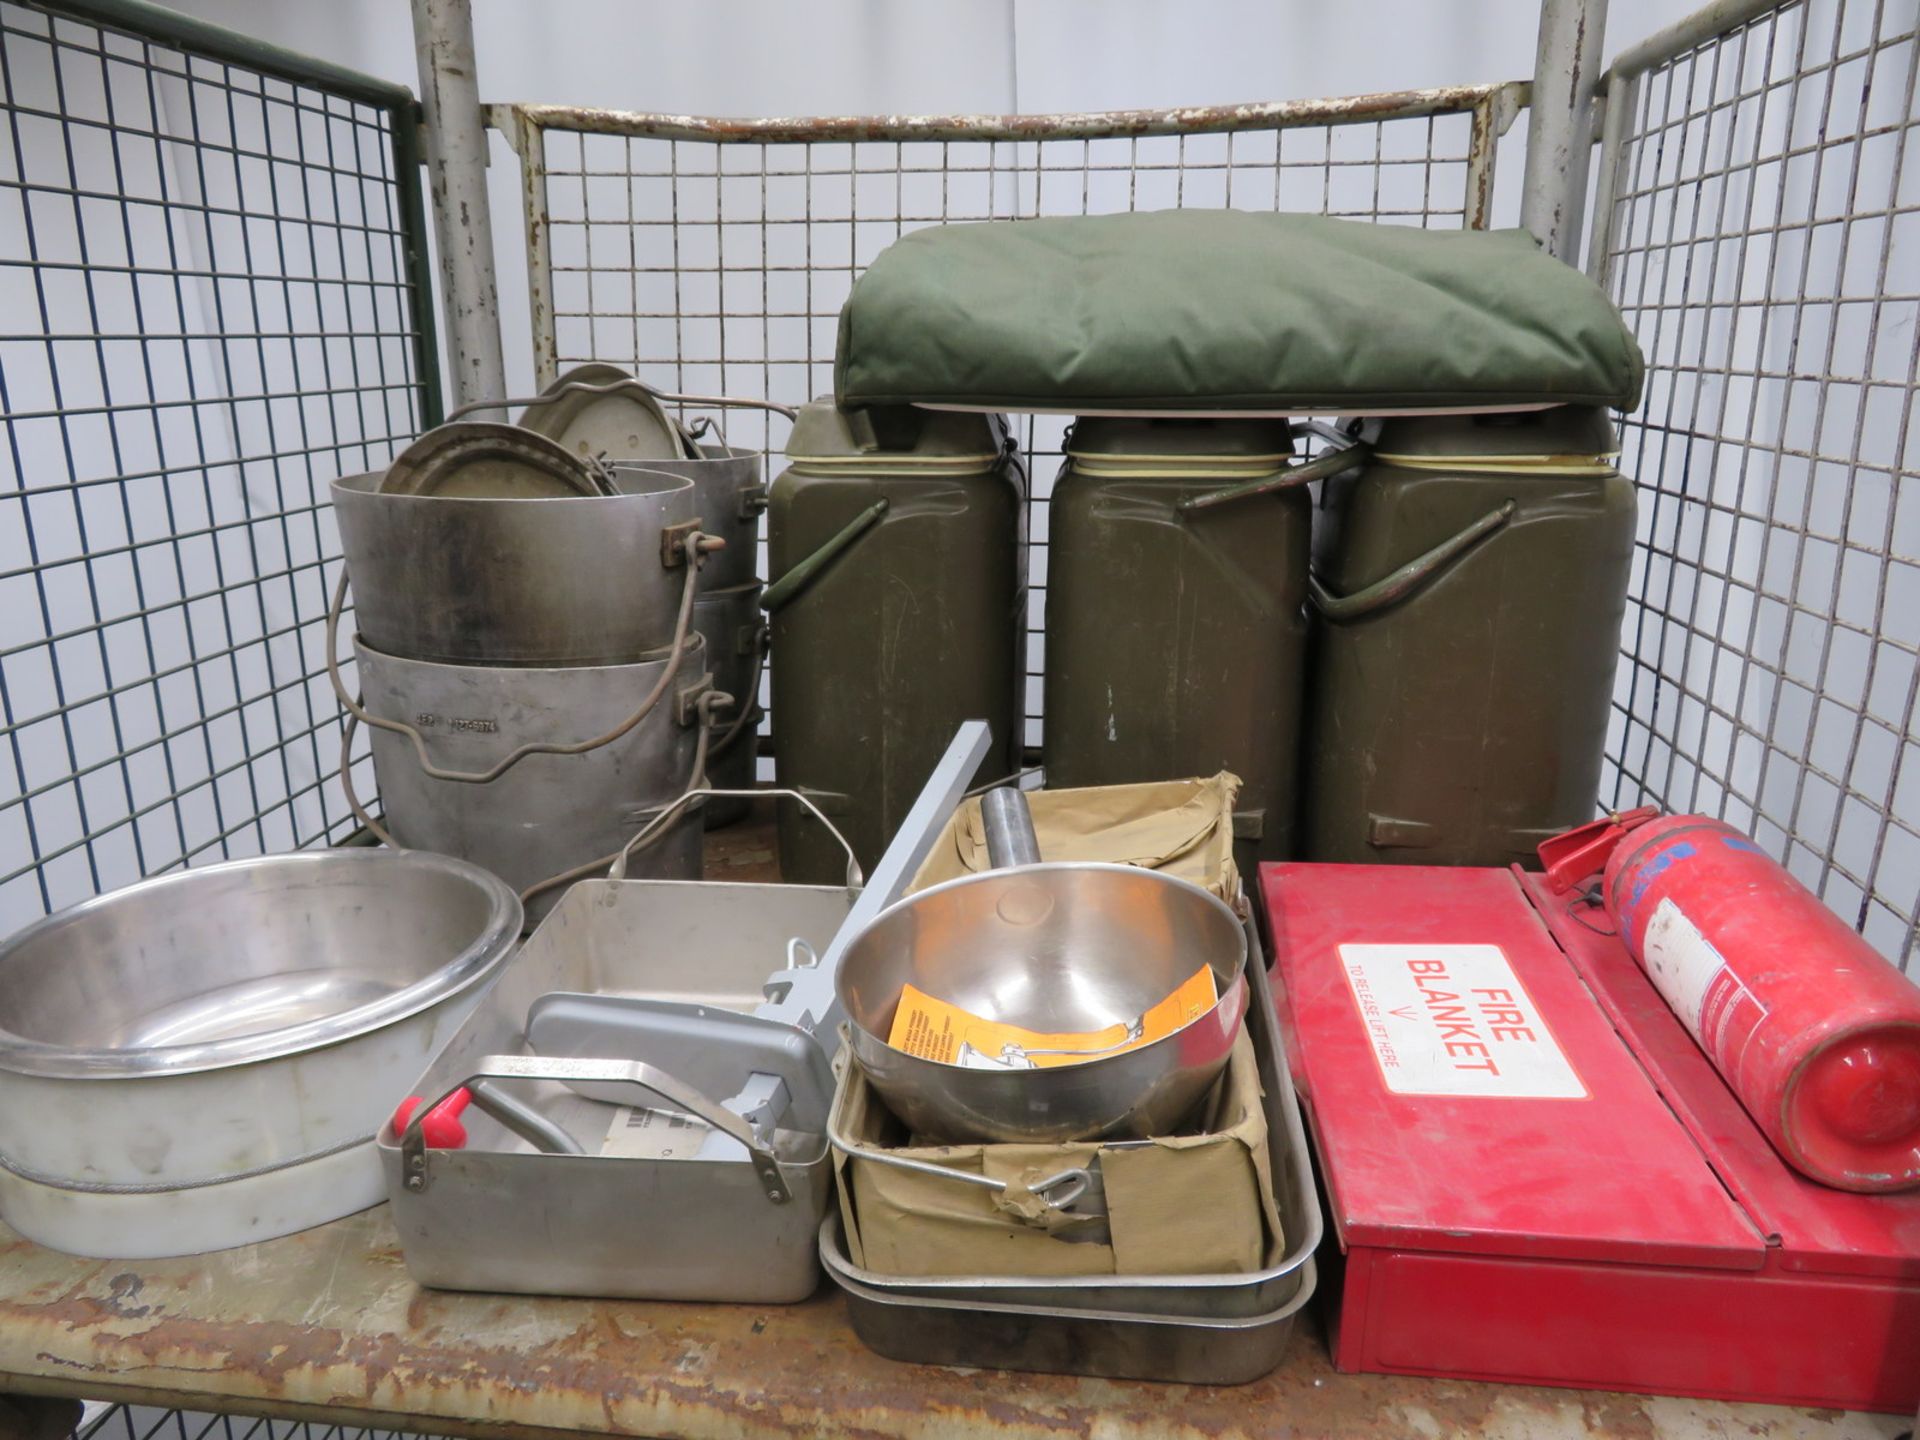 British Army No 5 field cooker & G1 No 5 hot box field oven set. - Image 14 of 18